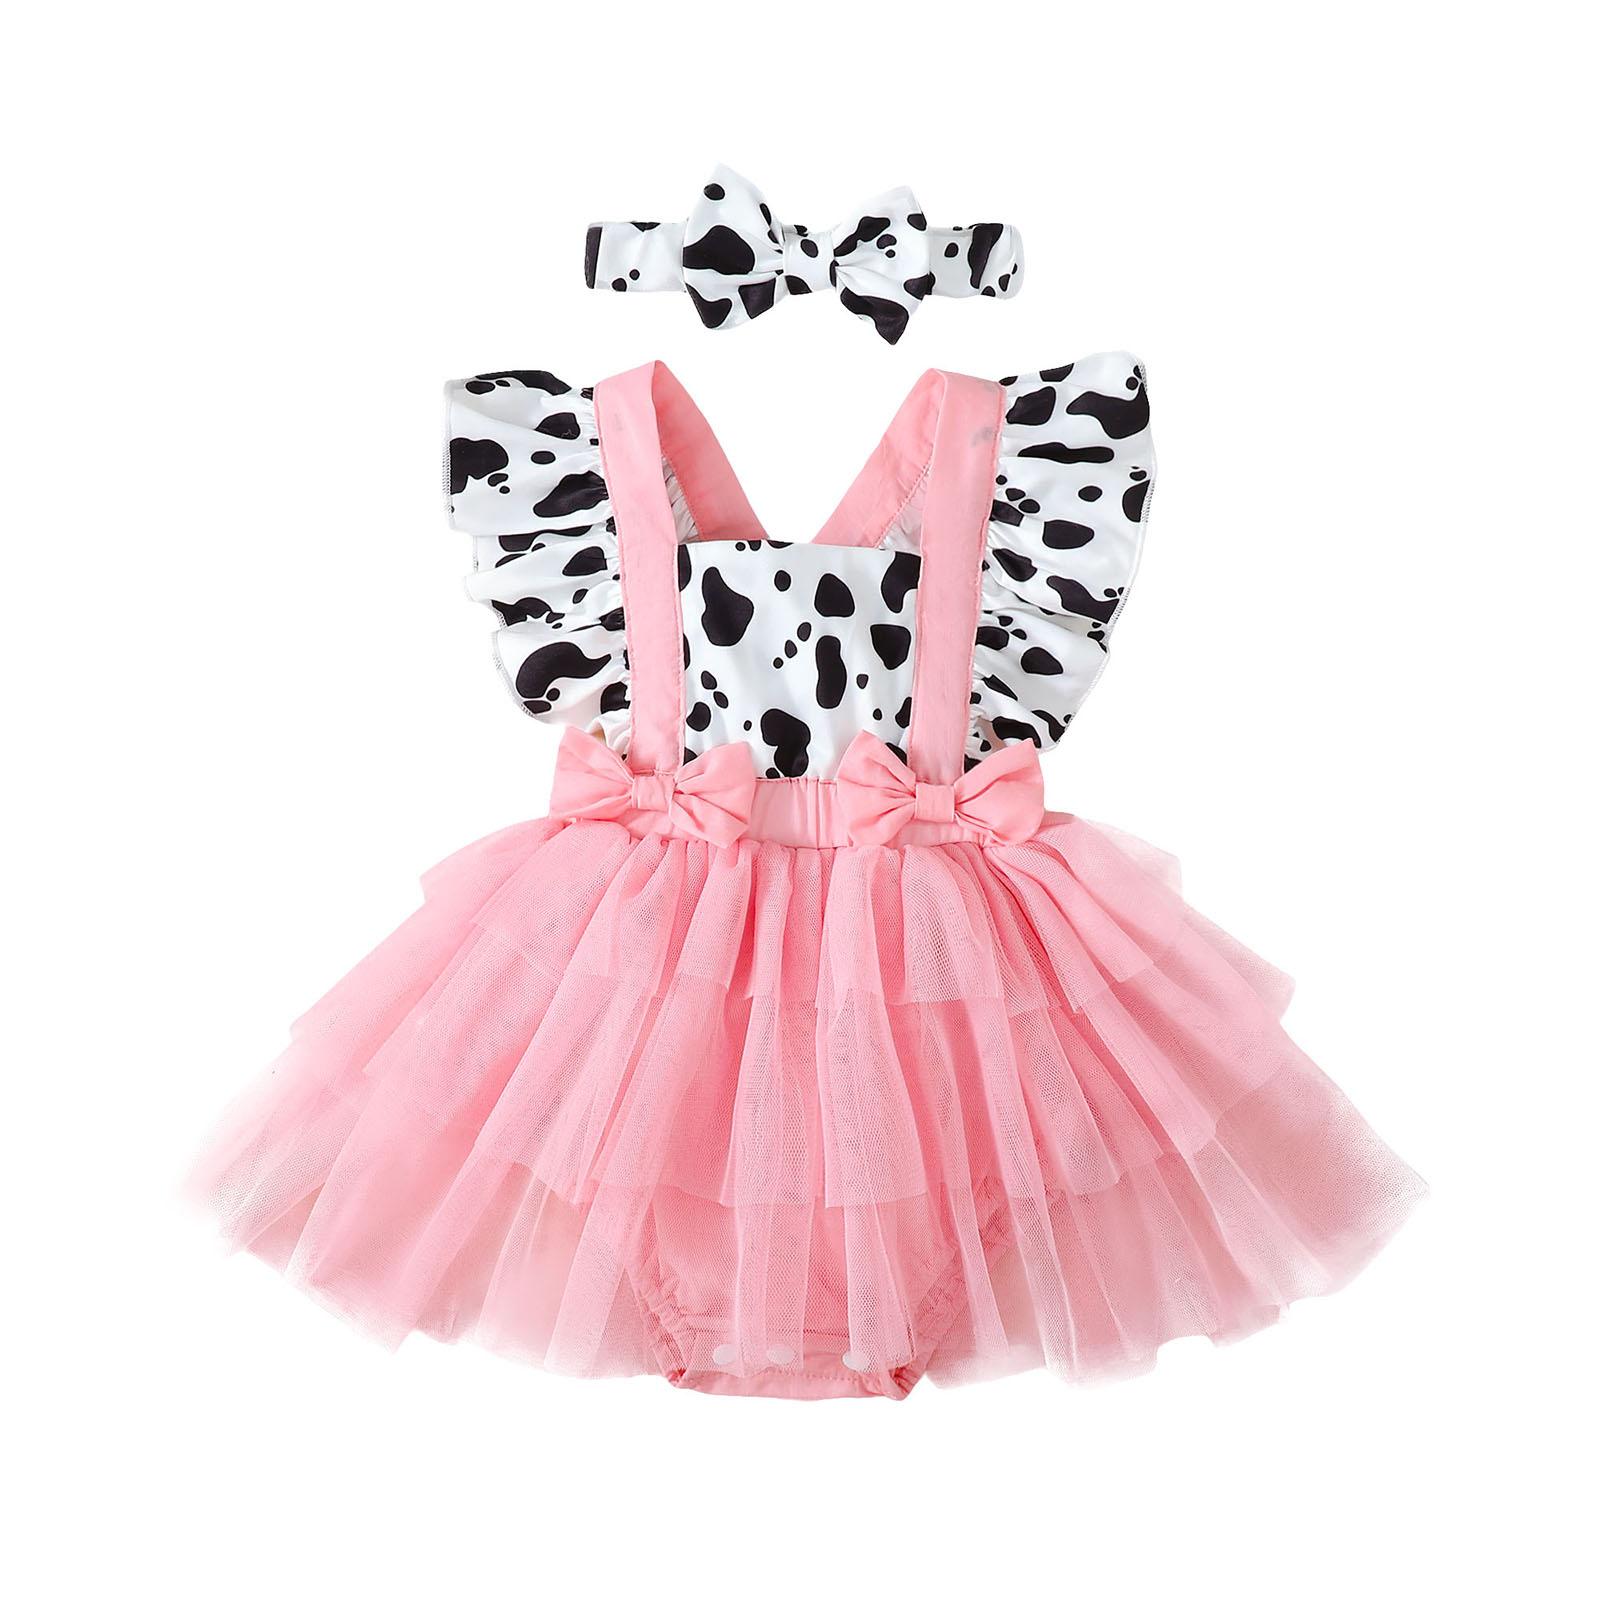 Little Fashionistas Baby Girls Summer Romper Dress 3 6 12 18 24 Months Flying Sleeve Cow Print Tulle Patchwork Romper with Headband